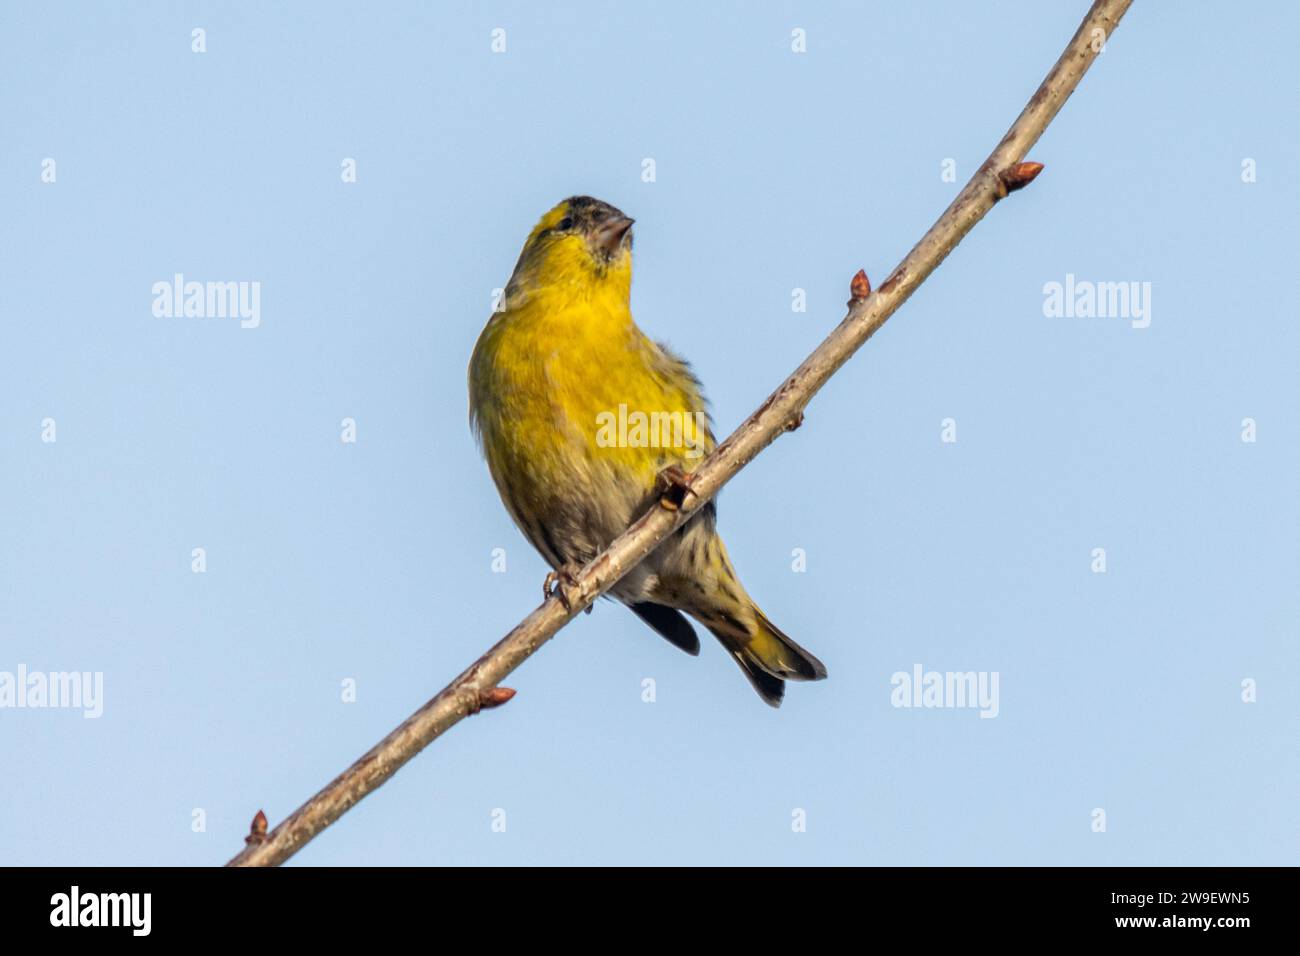 A male siskin (Spinus spinus) bird perched in a tree, England, UK, a species of finch Stock Photo